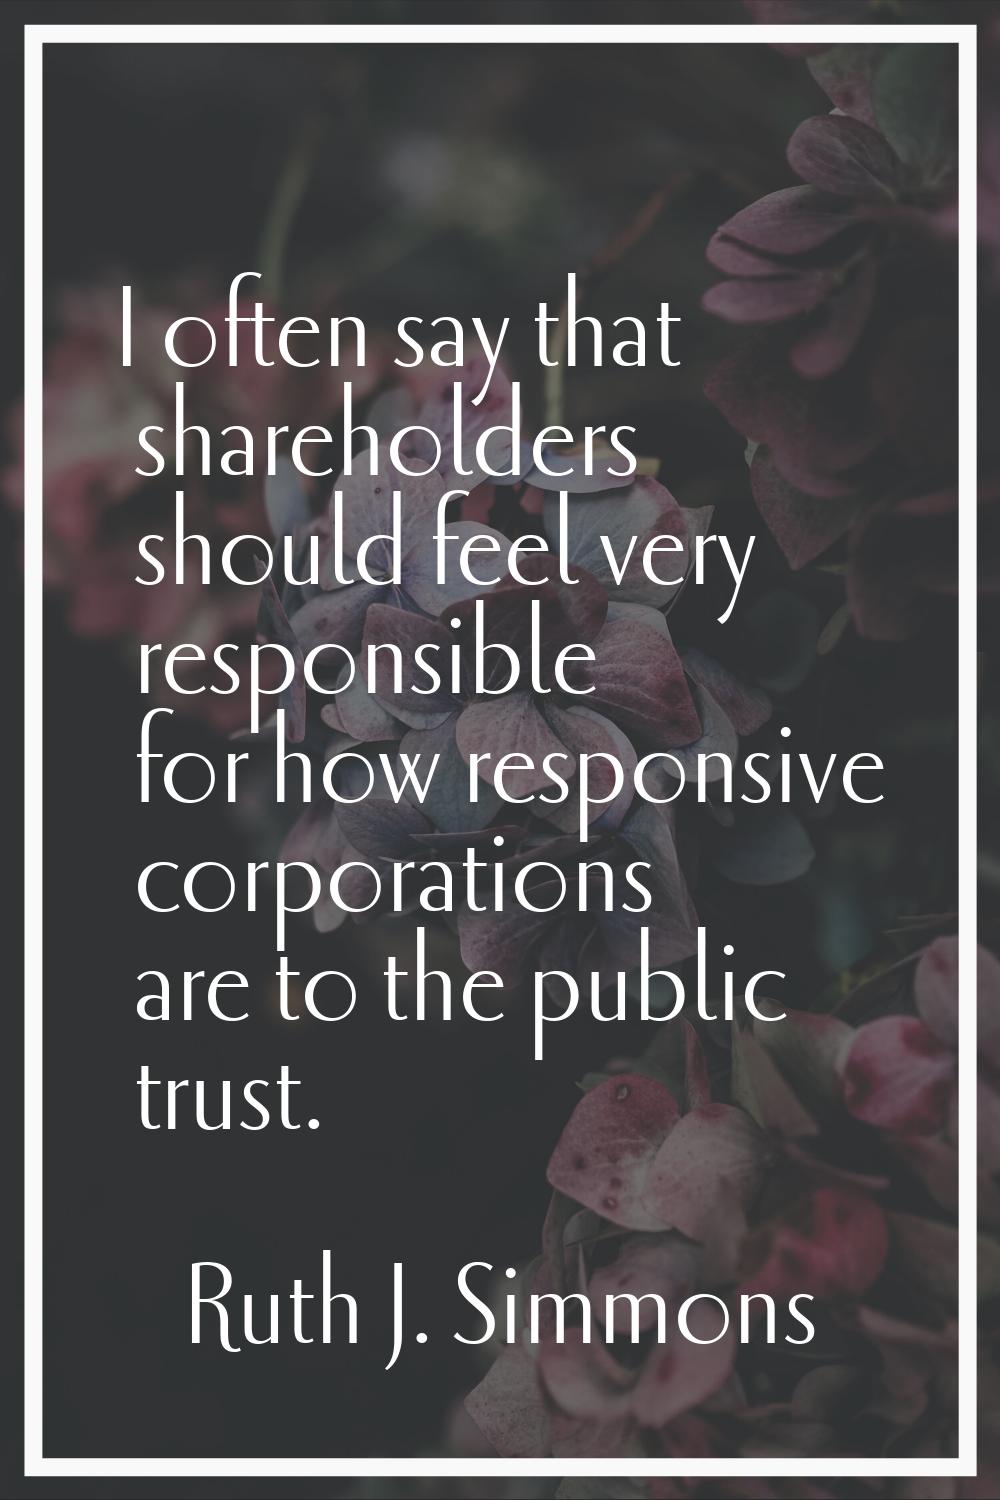 I often say that shareholders should feel very responsible for how responsive corporations are to t